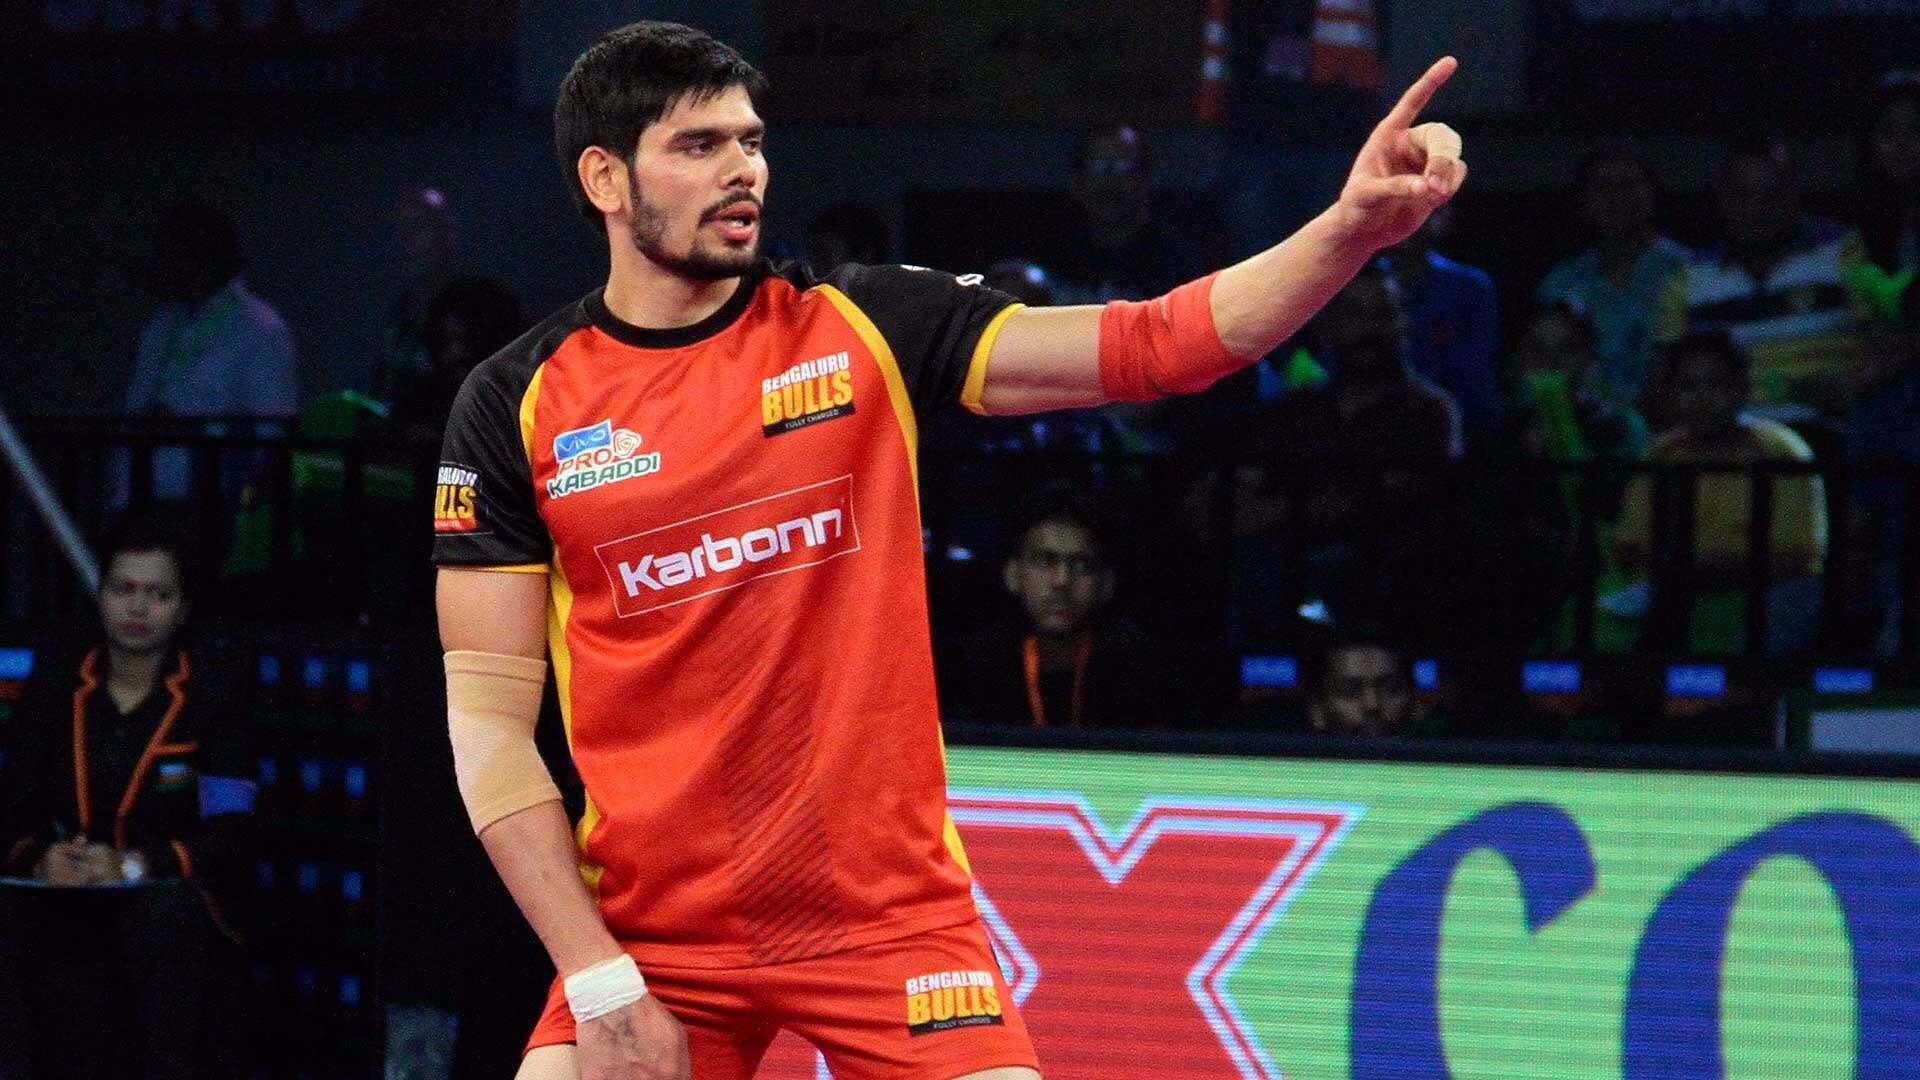 Rohit Kumar: My father asked me to invest more in kabaddi, build a career